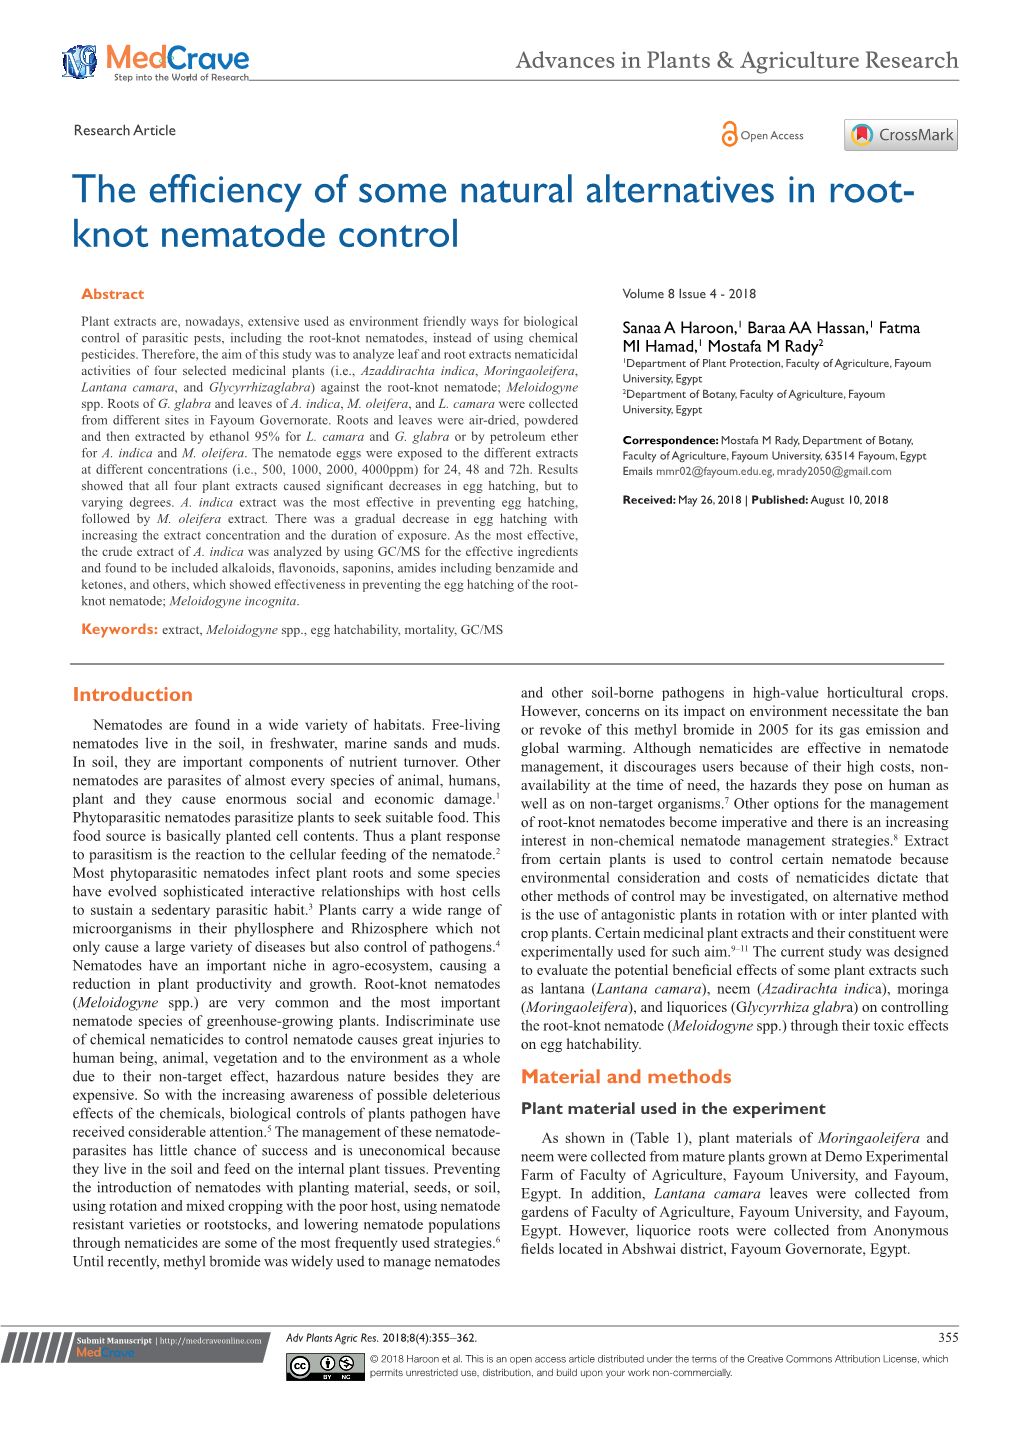 The Efficiency of Some Natural Alternatives in Root-Knot Nematode Control ©2018 Haroon Et Al